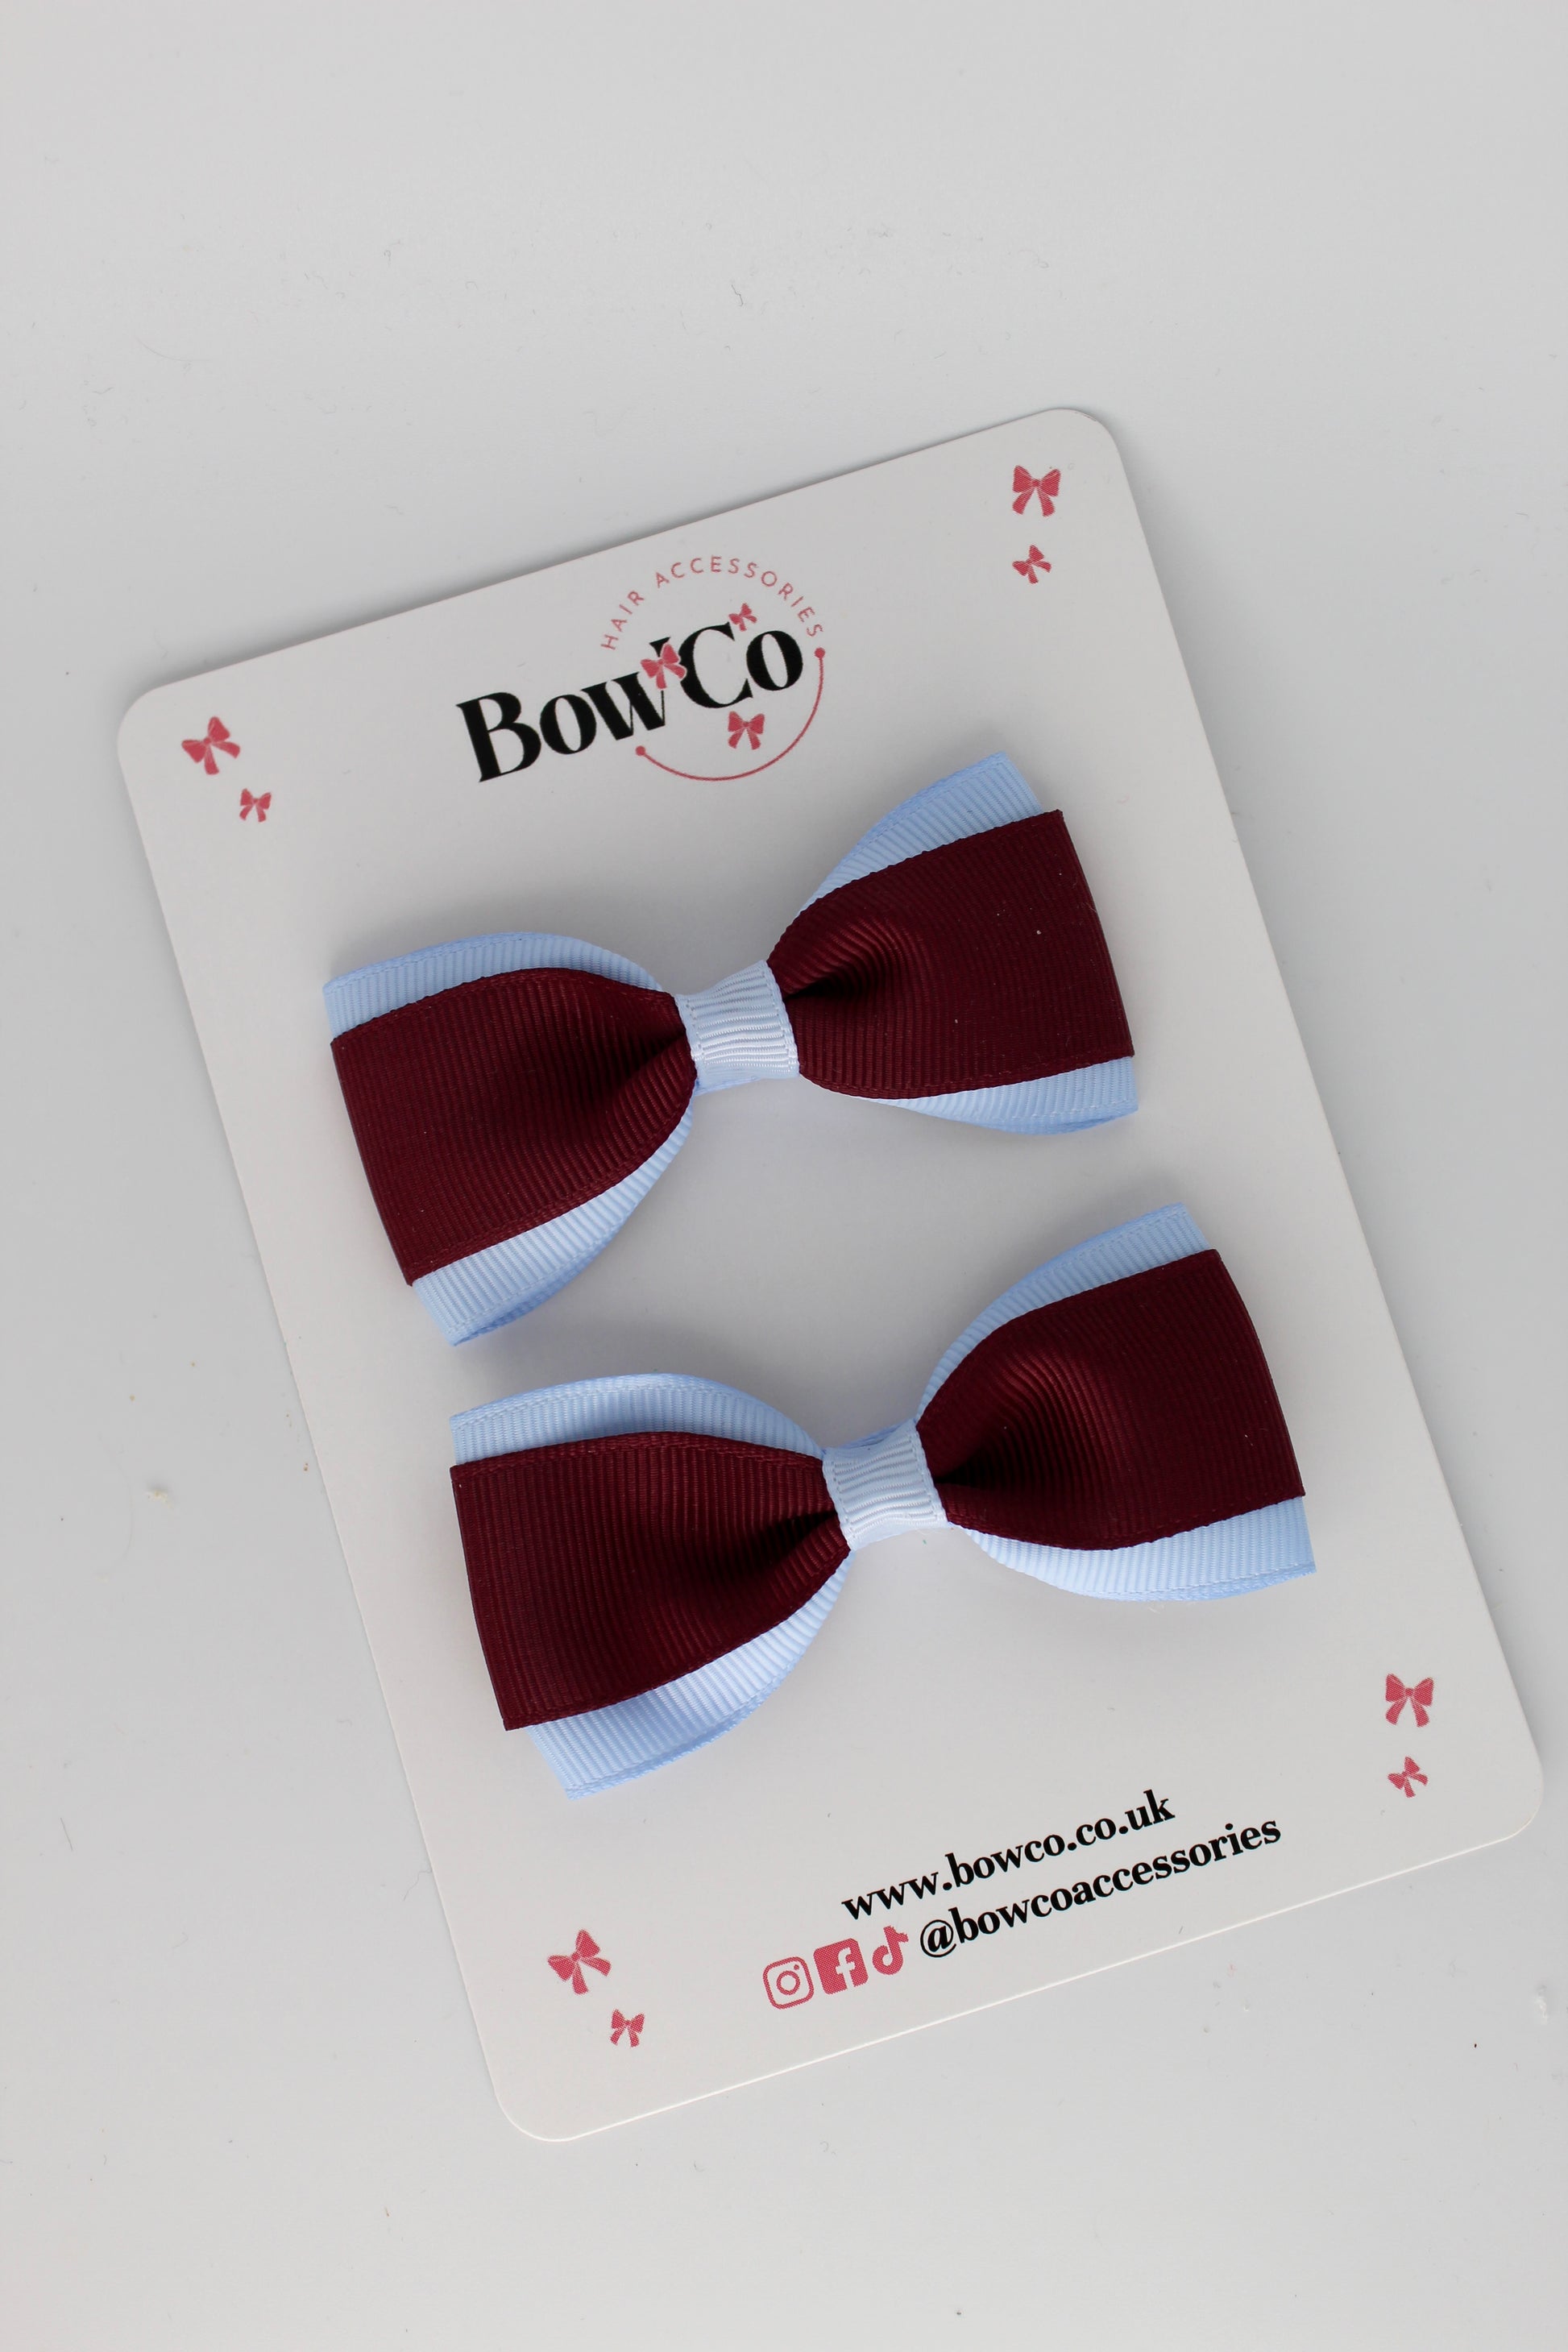 3 Inch Tuxedo Bow - Clip - 2 Pack - Burgundy and Bluebell